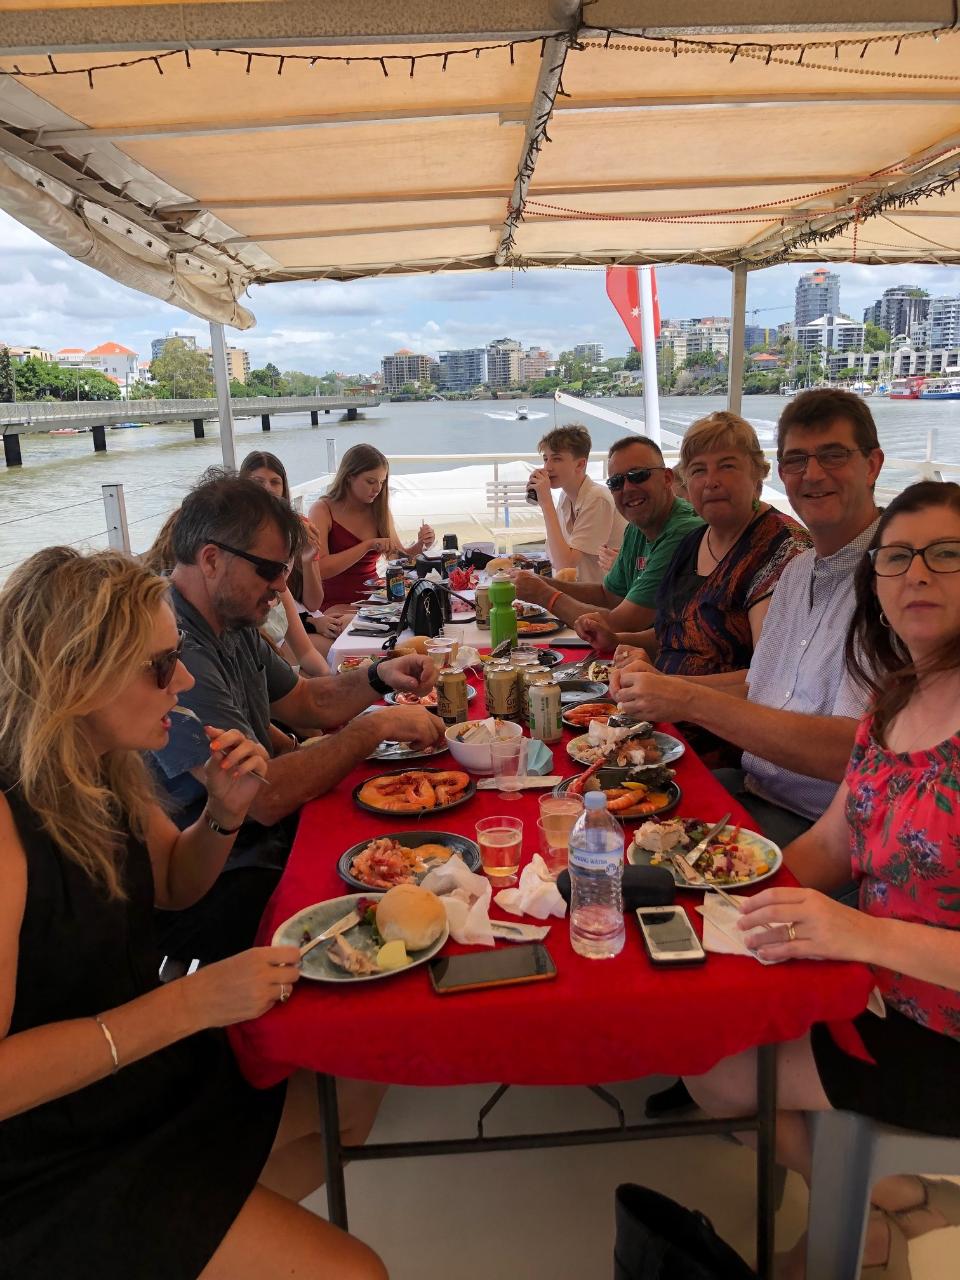 christmas cruise lunch